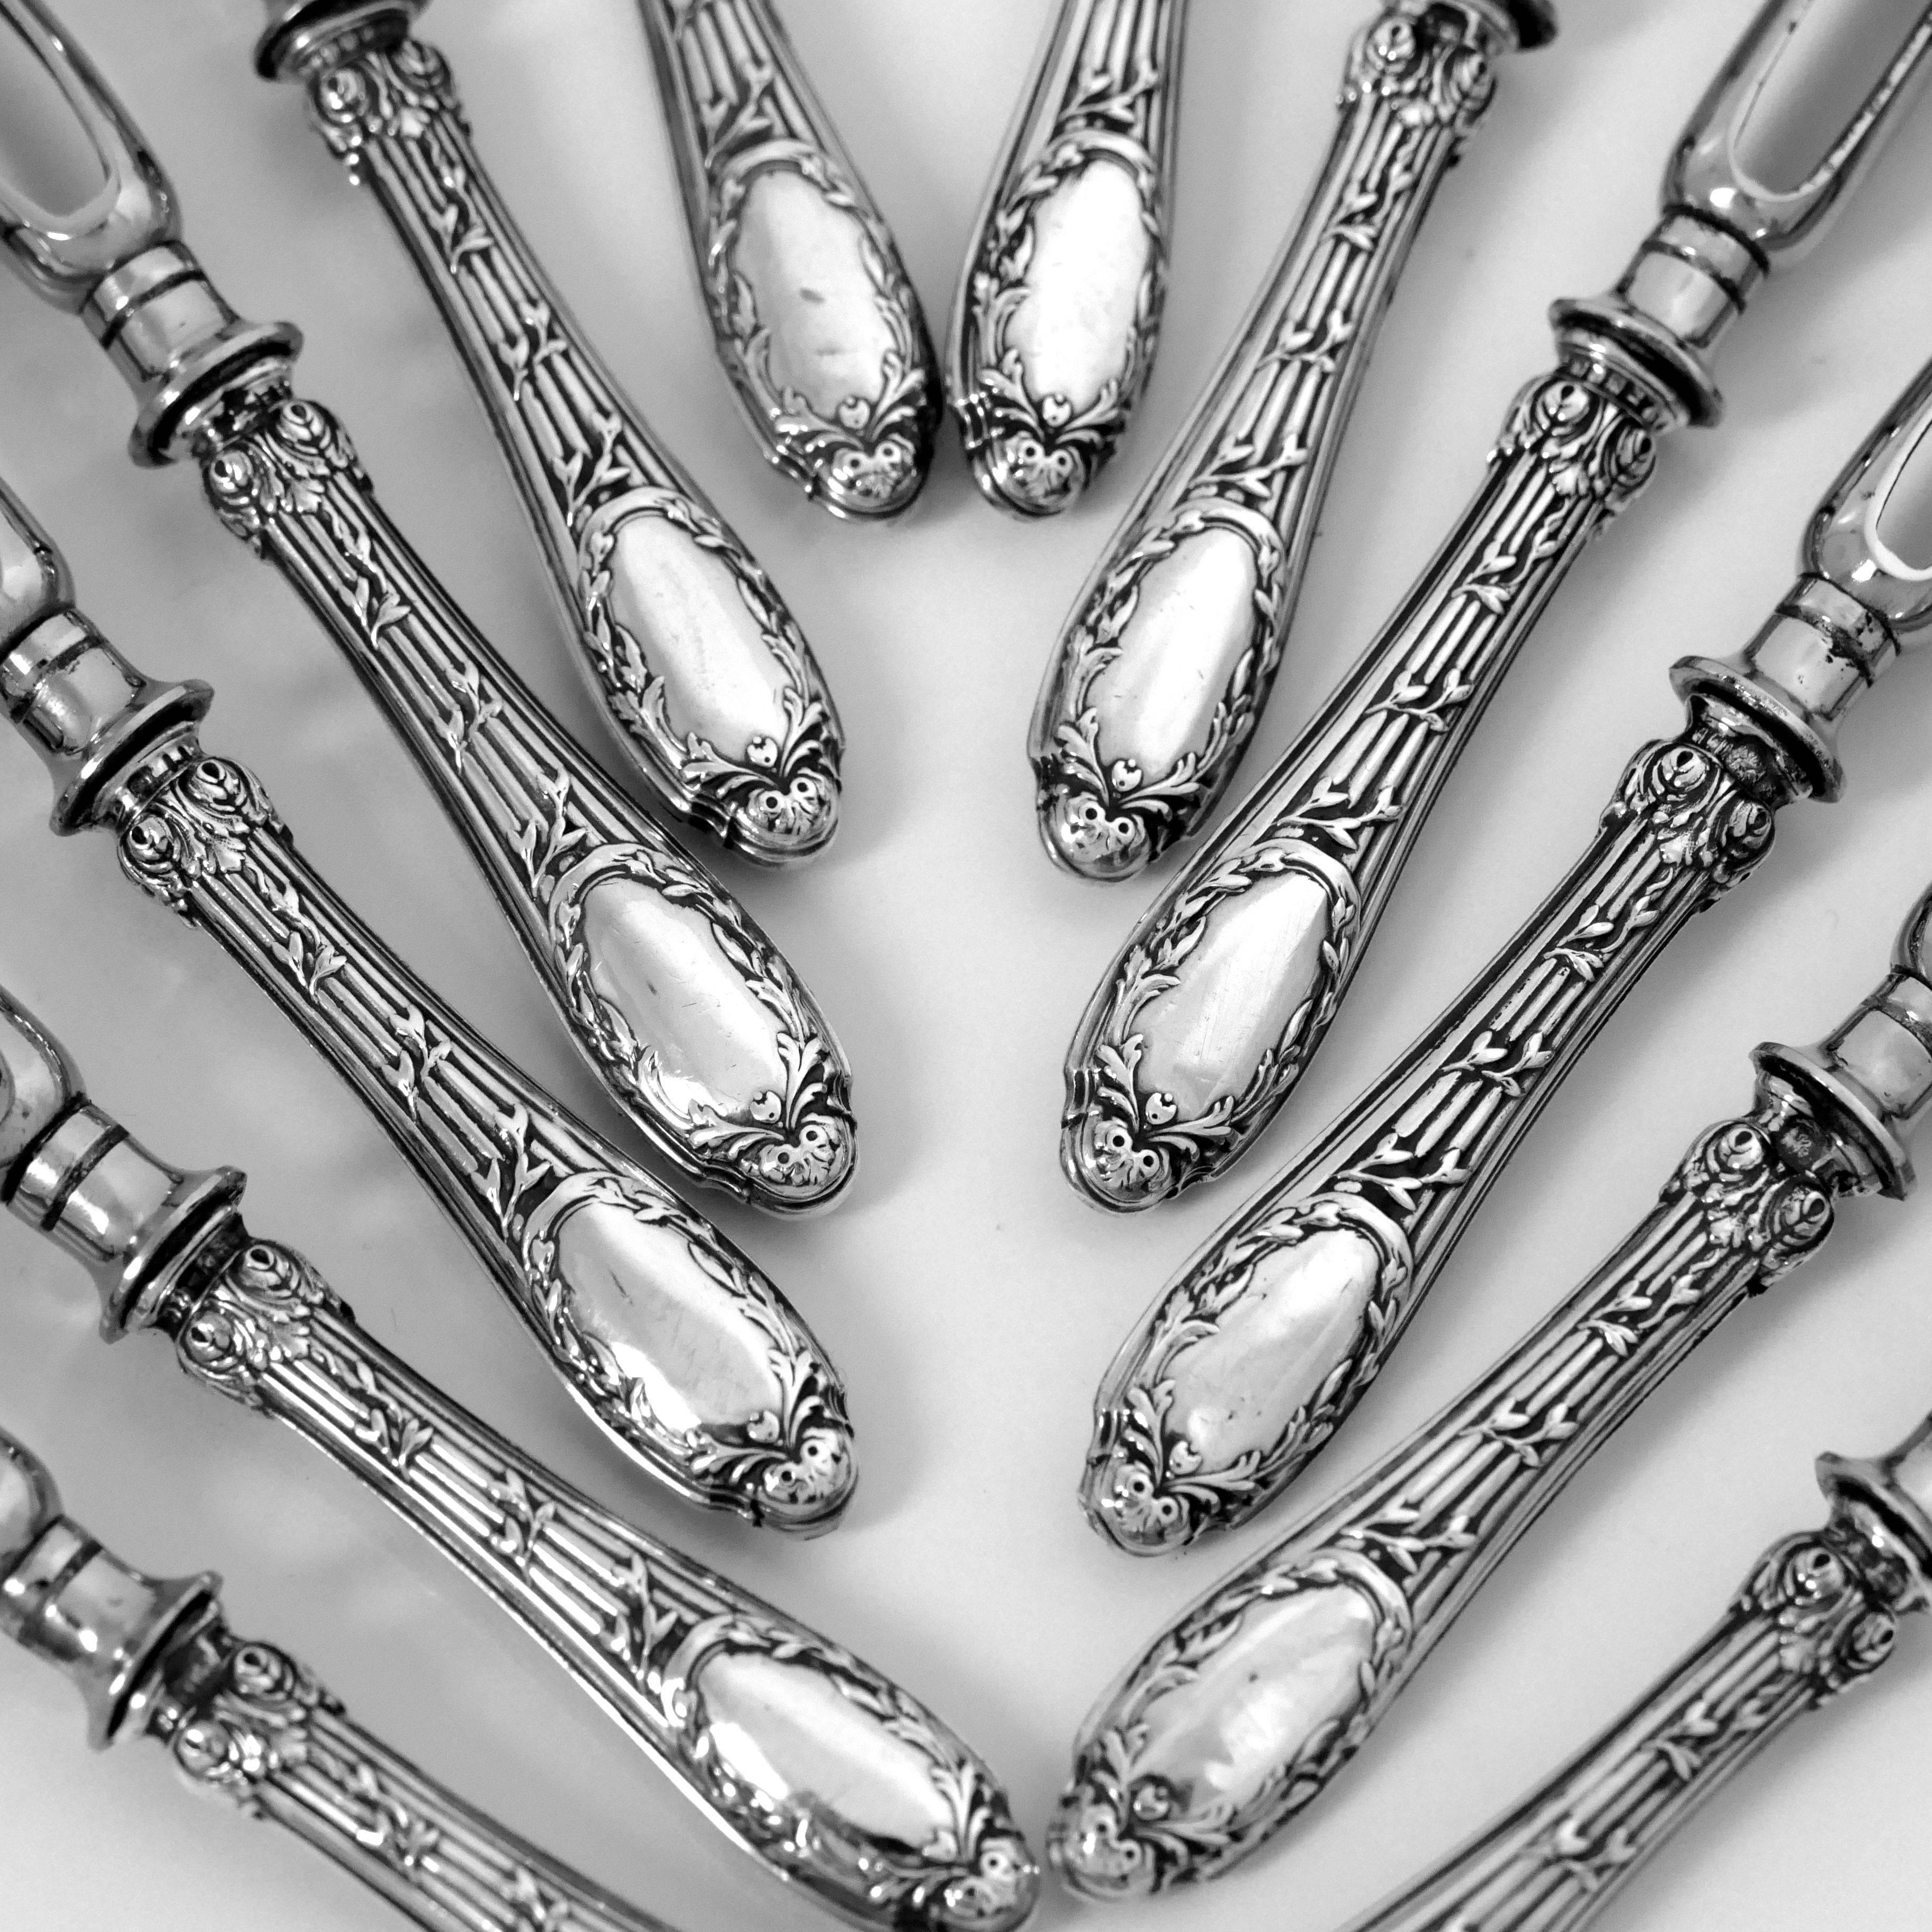 Silver Plate Rare French Sterling Silver Cutlet Holders Set of 12 Pieces, Original Box